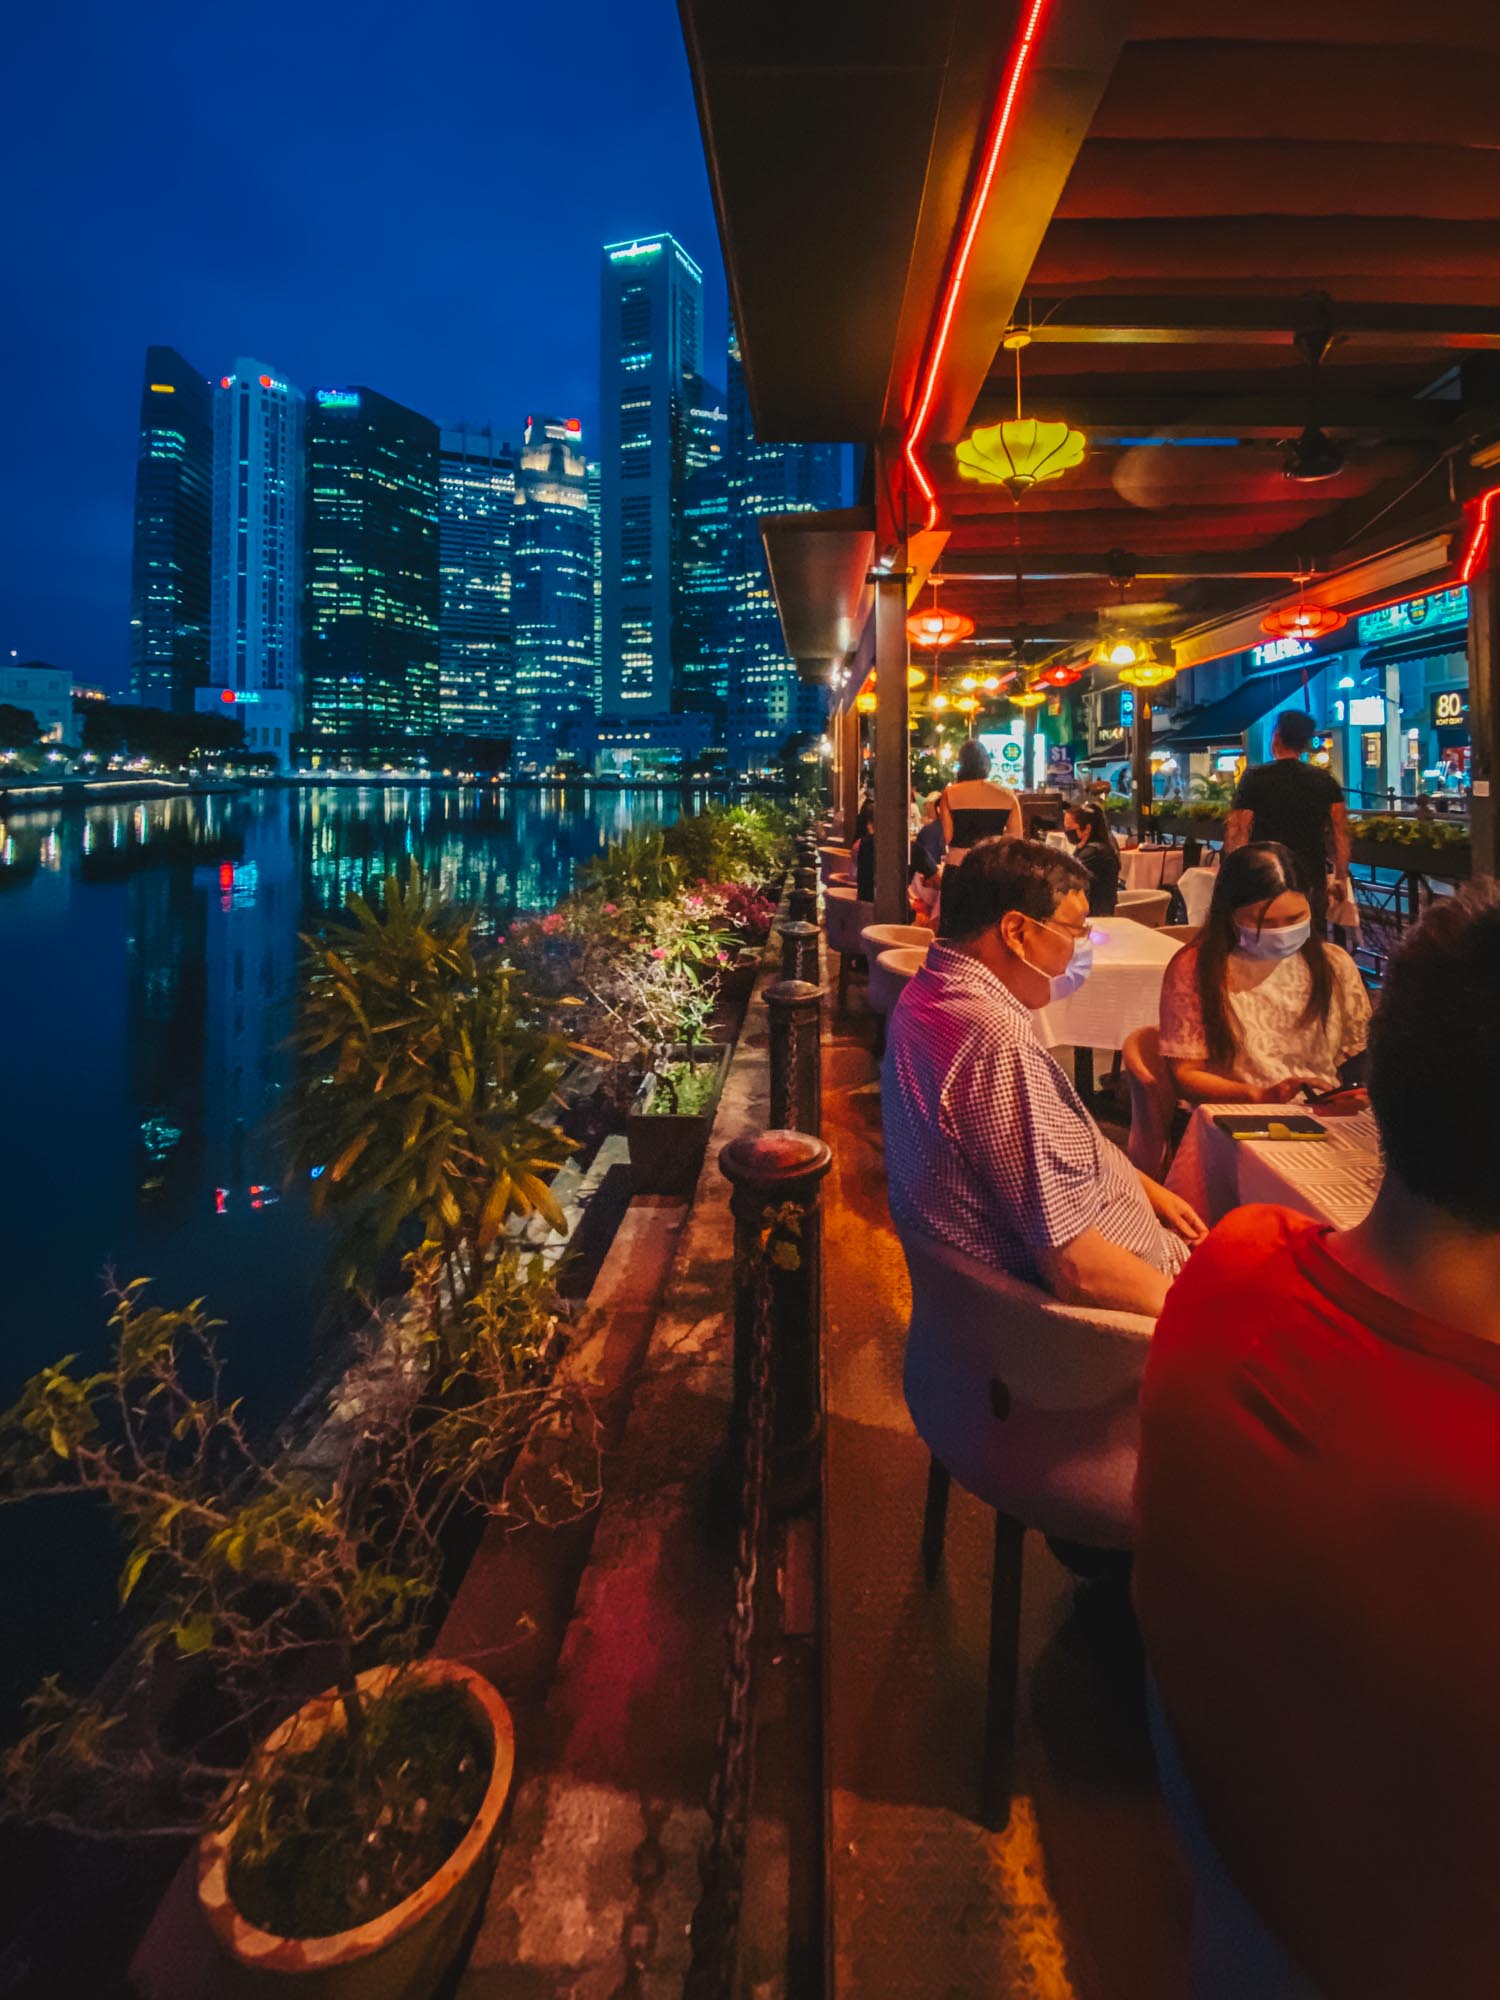 George-Town-Tze-Char-Craft-Beer-Boat-Quay-Singapore-darrenbloggie